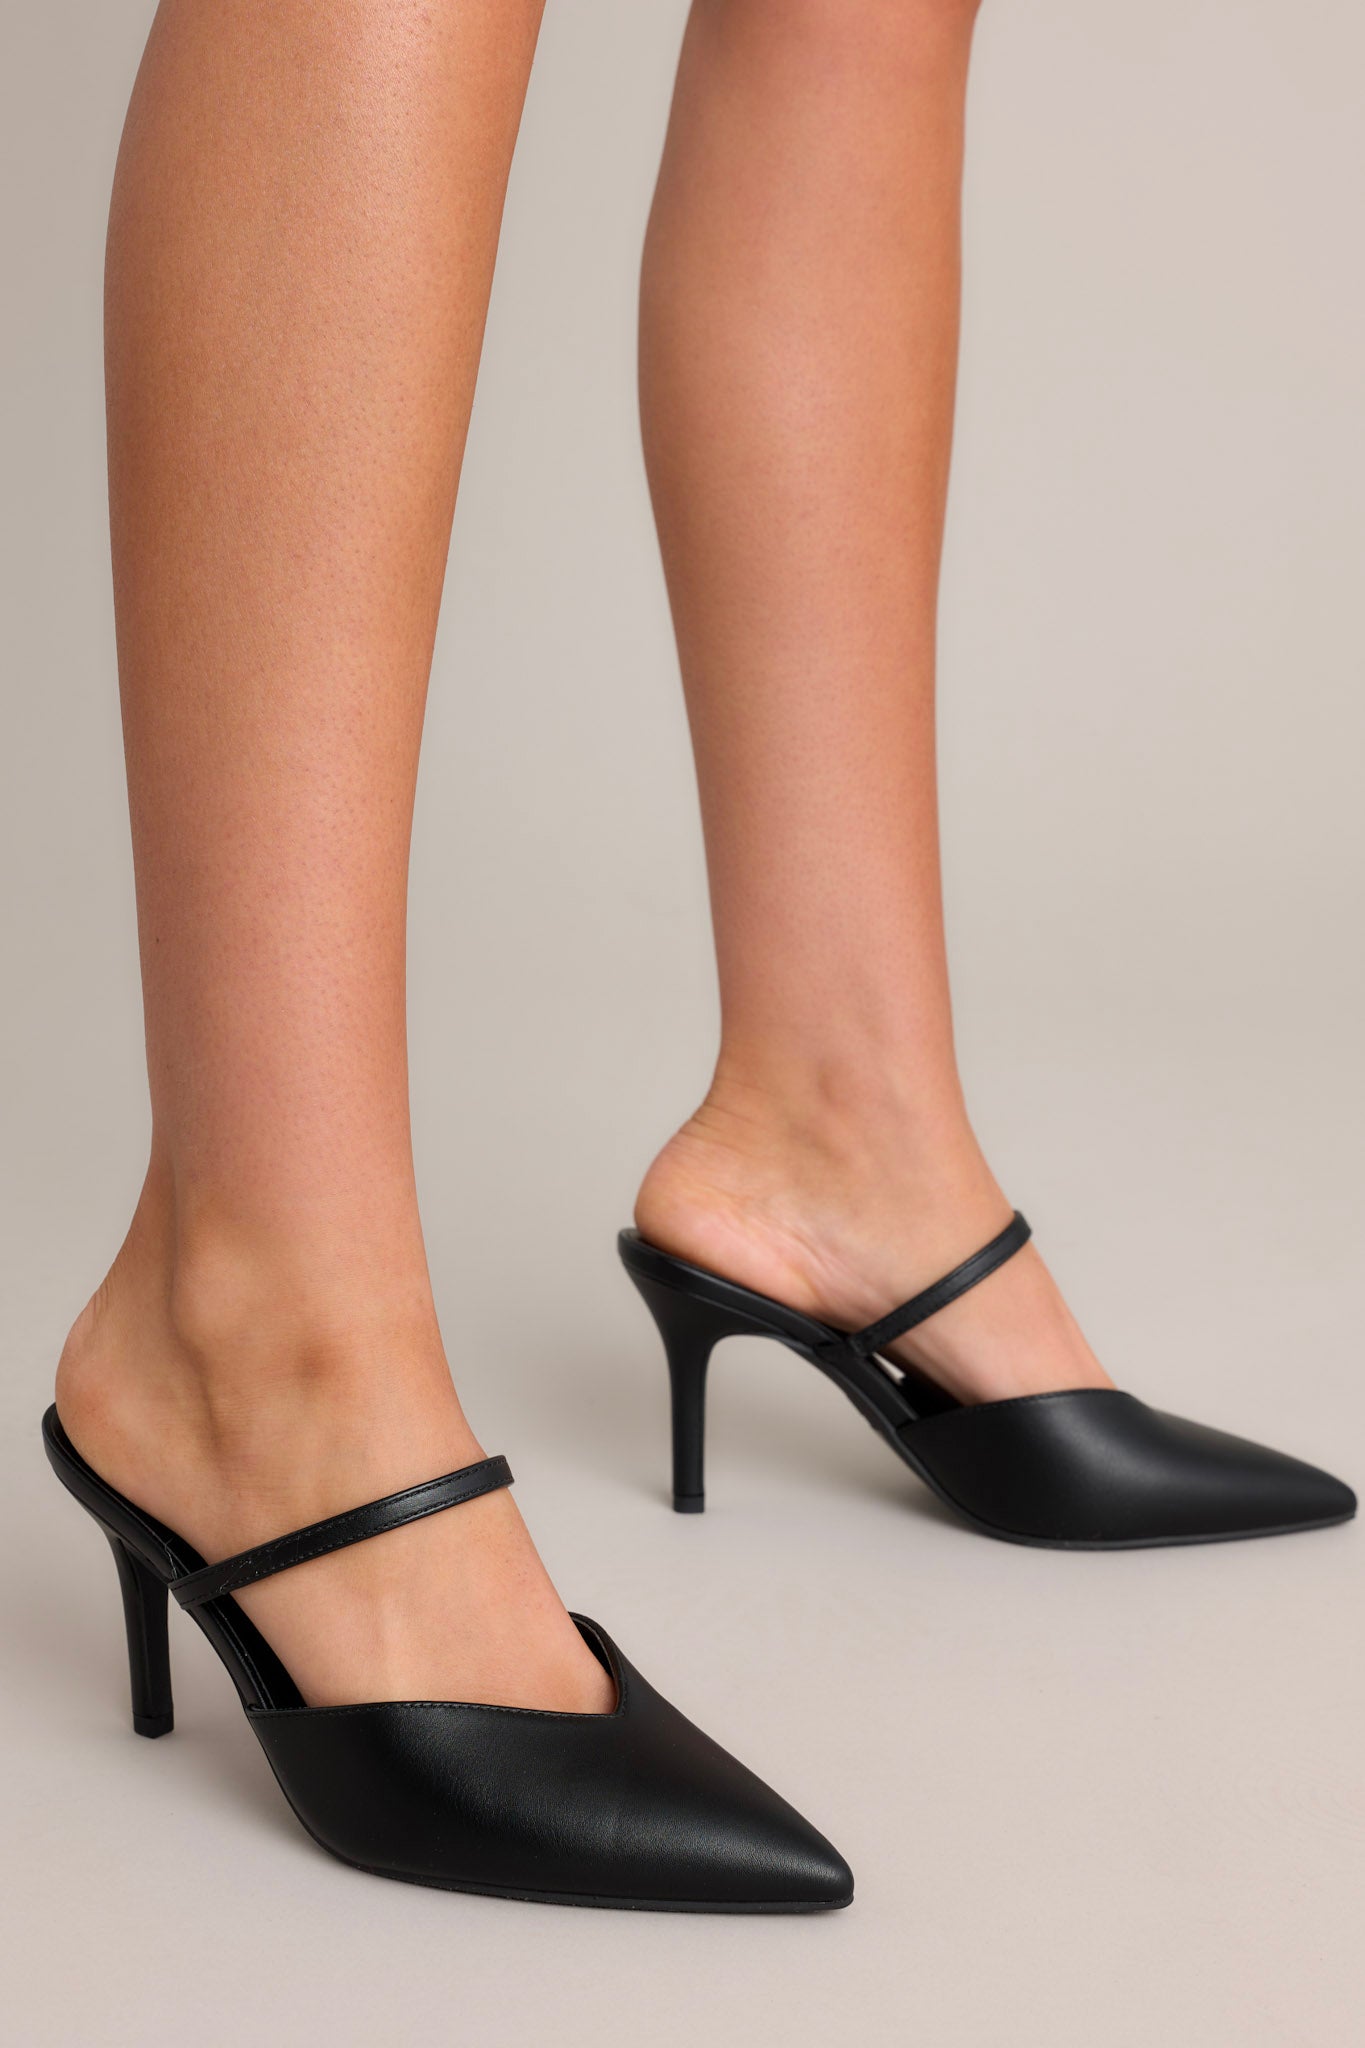 Side view of these heels that feature a pointed closed toe design, a strap over the top of the foot, and a short heel.